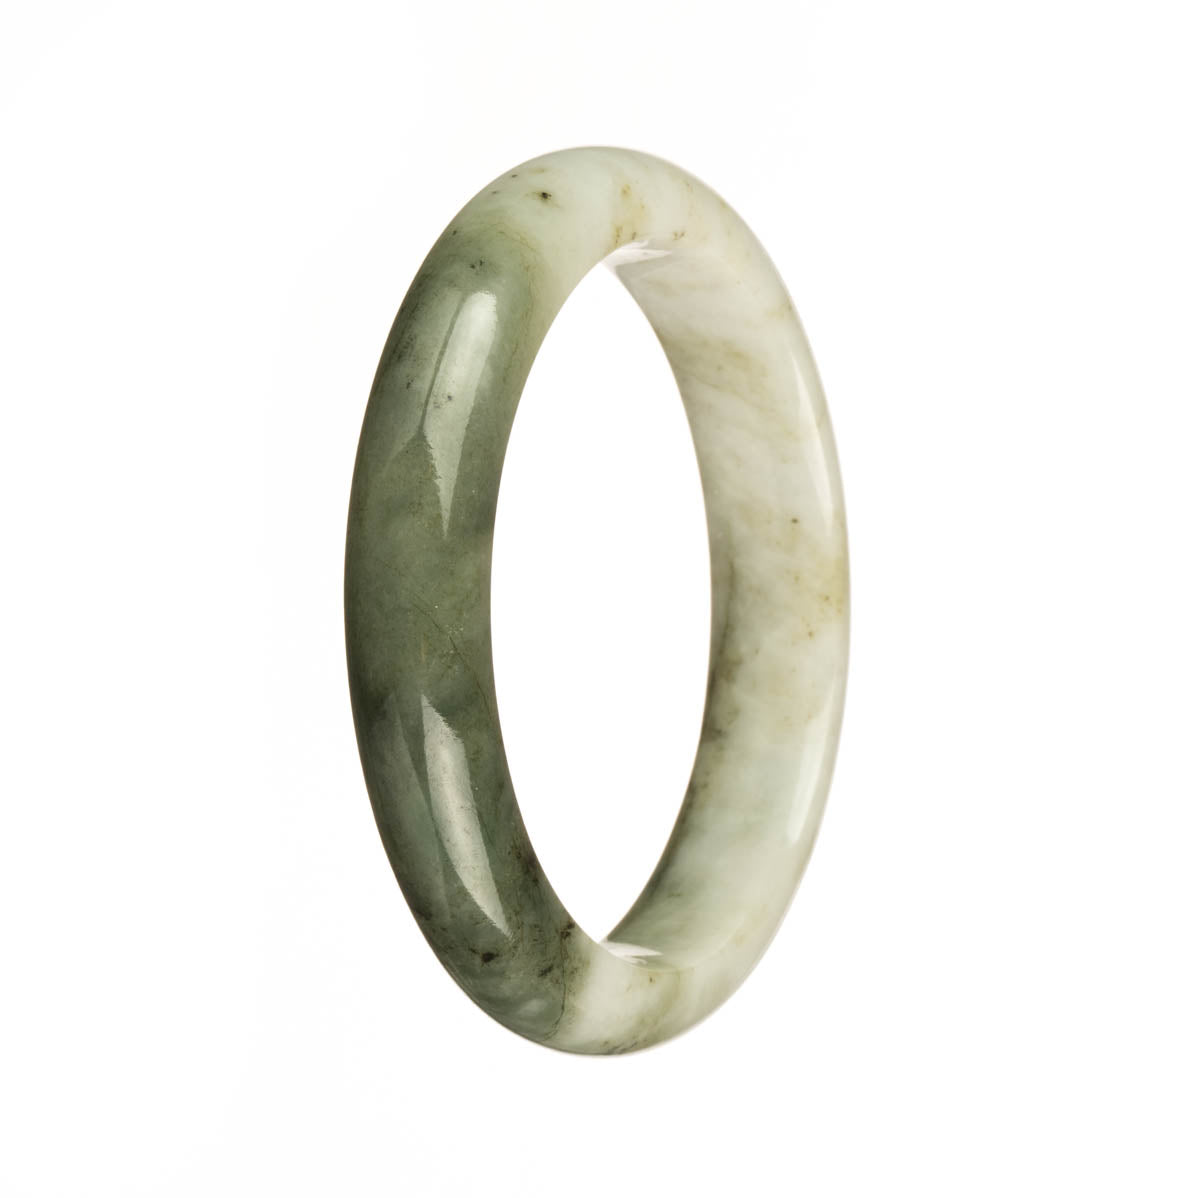 An elegant half-moon shaped white and green jade bracelet, handcrafted with utmost precision and made from top-quality Grade A jade. Perfect for adding a touch of traditional charm to any outfit.